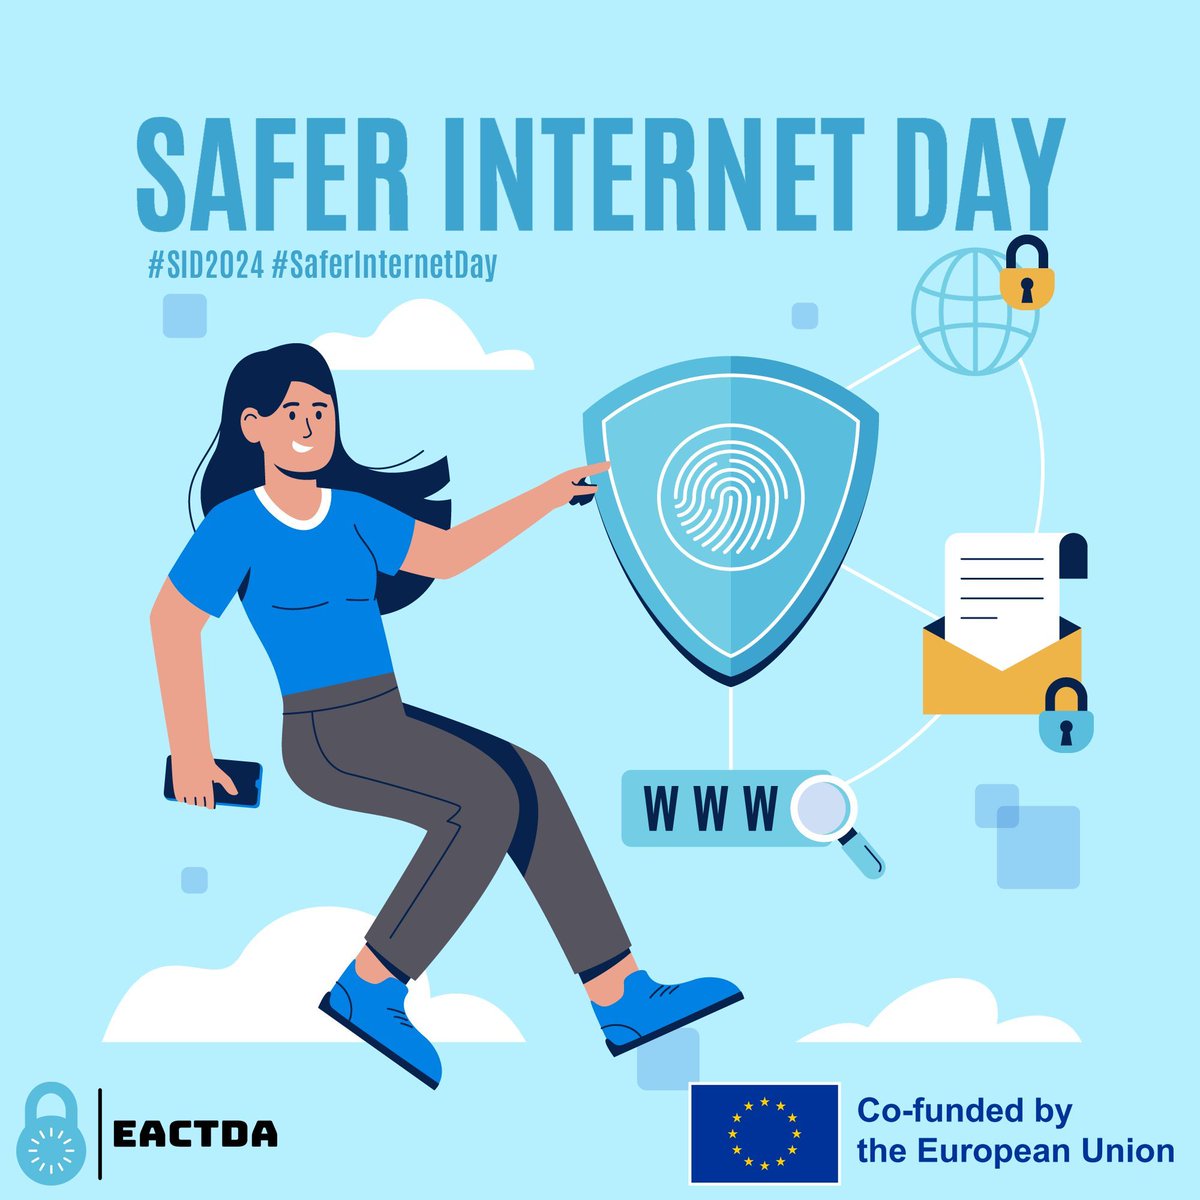 Second day, second week, second month: as every year, this concurrence marks the global celebration of #SaferInternetDay! 

ℹ️ More info: saferinternetday.org 

#SID2024